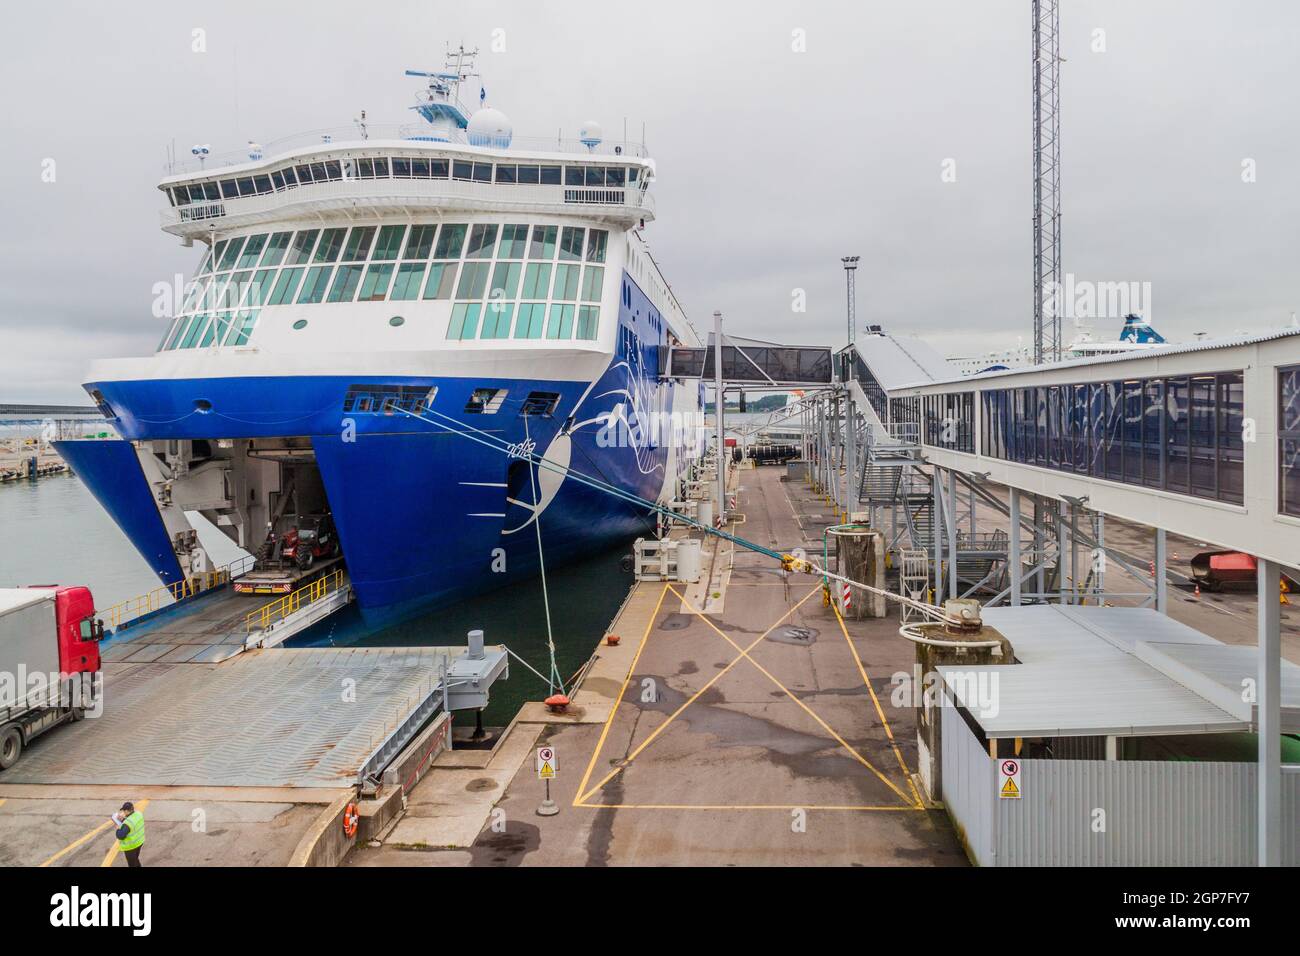 TALLINN, ESTONIA - AUGUST 24, 2016: MS Finlandia cruiseferry owned and operated by the Finnish ferry operator Eckero Line in the harbor of Tallinn. Th Stock Photo